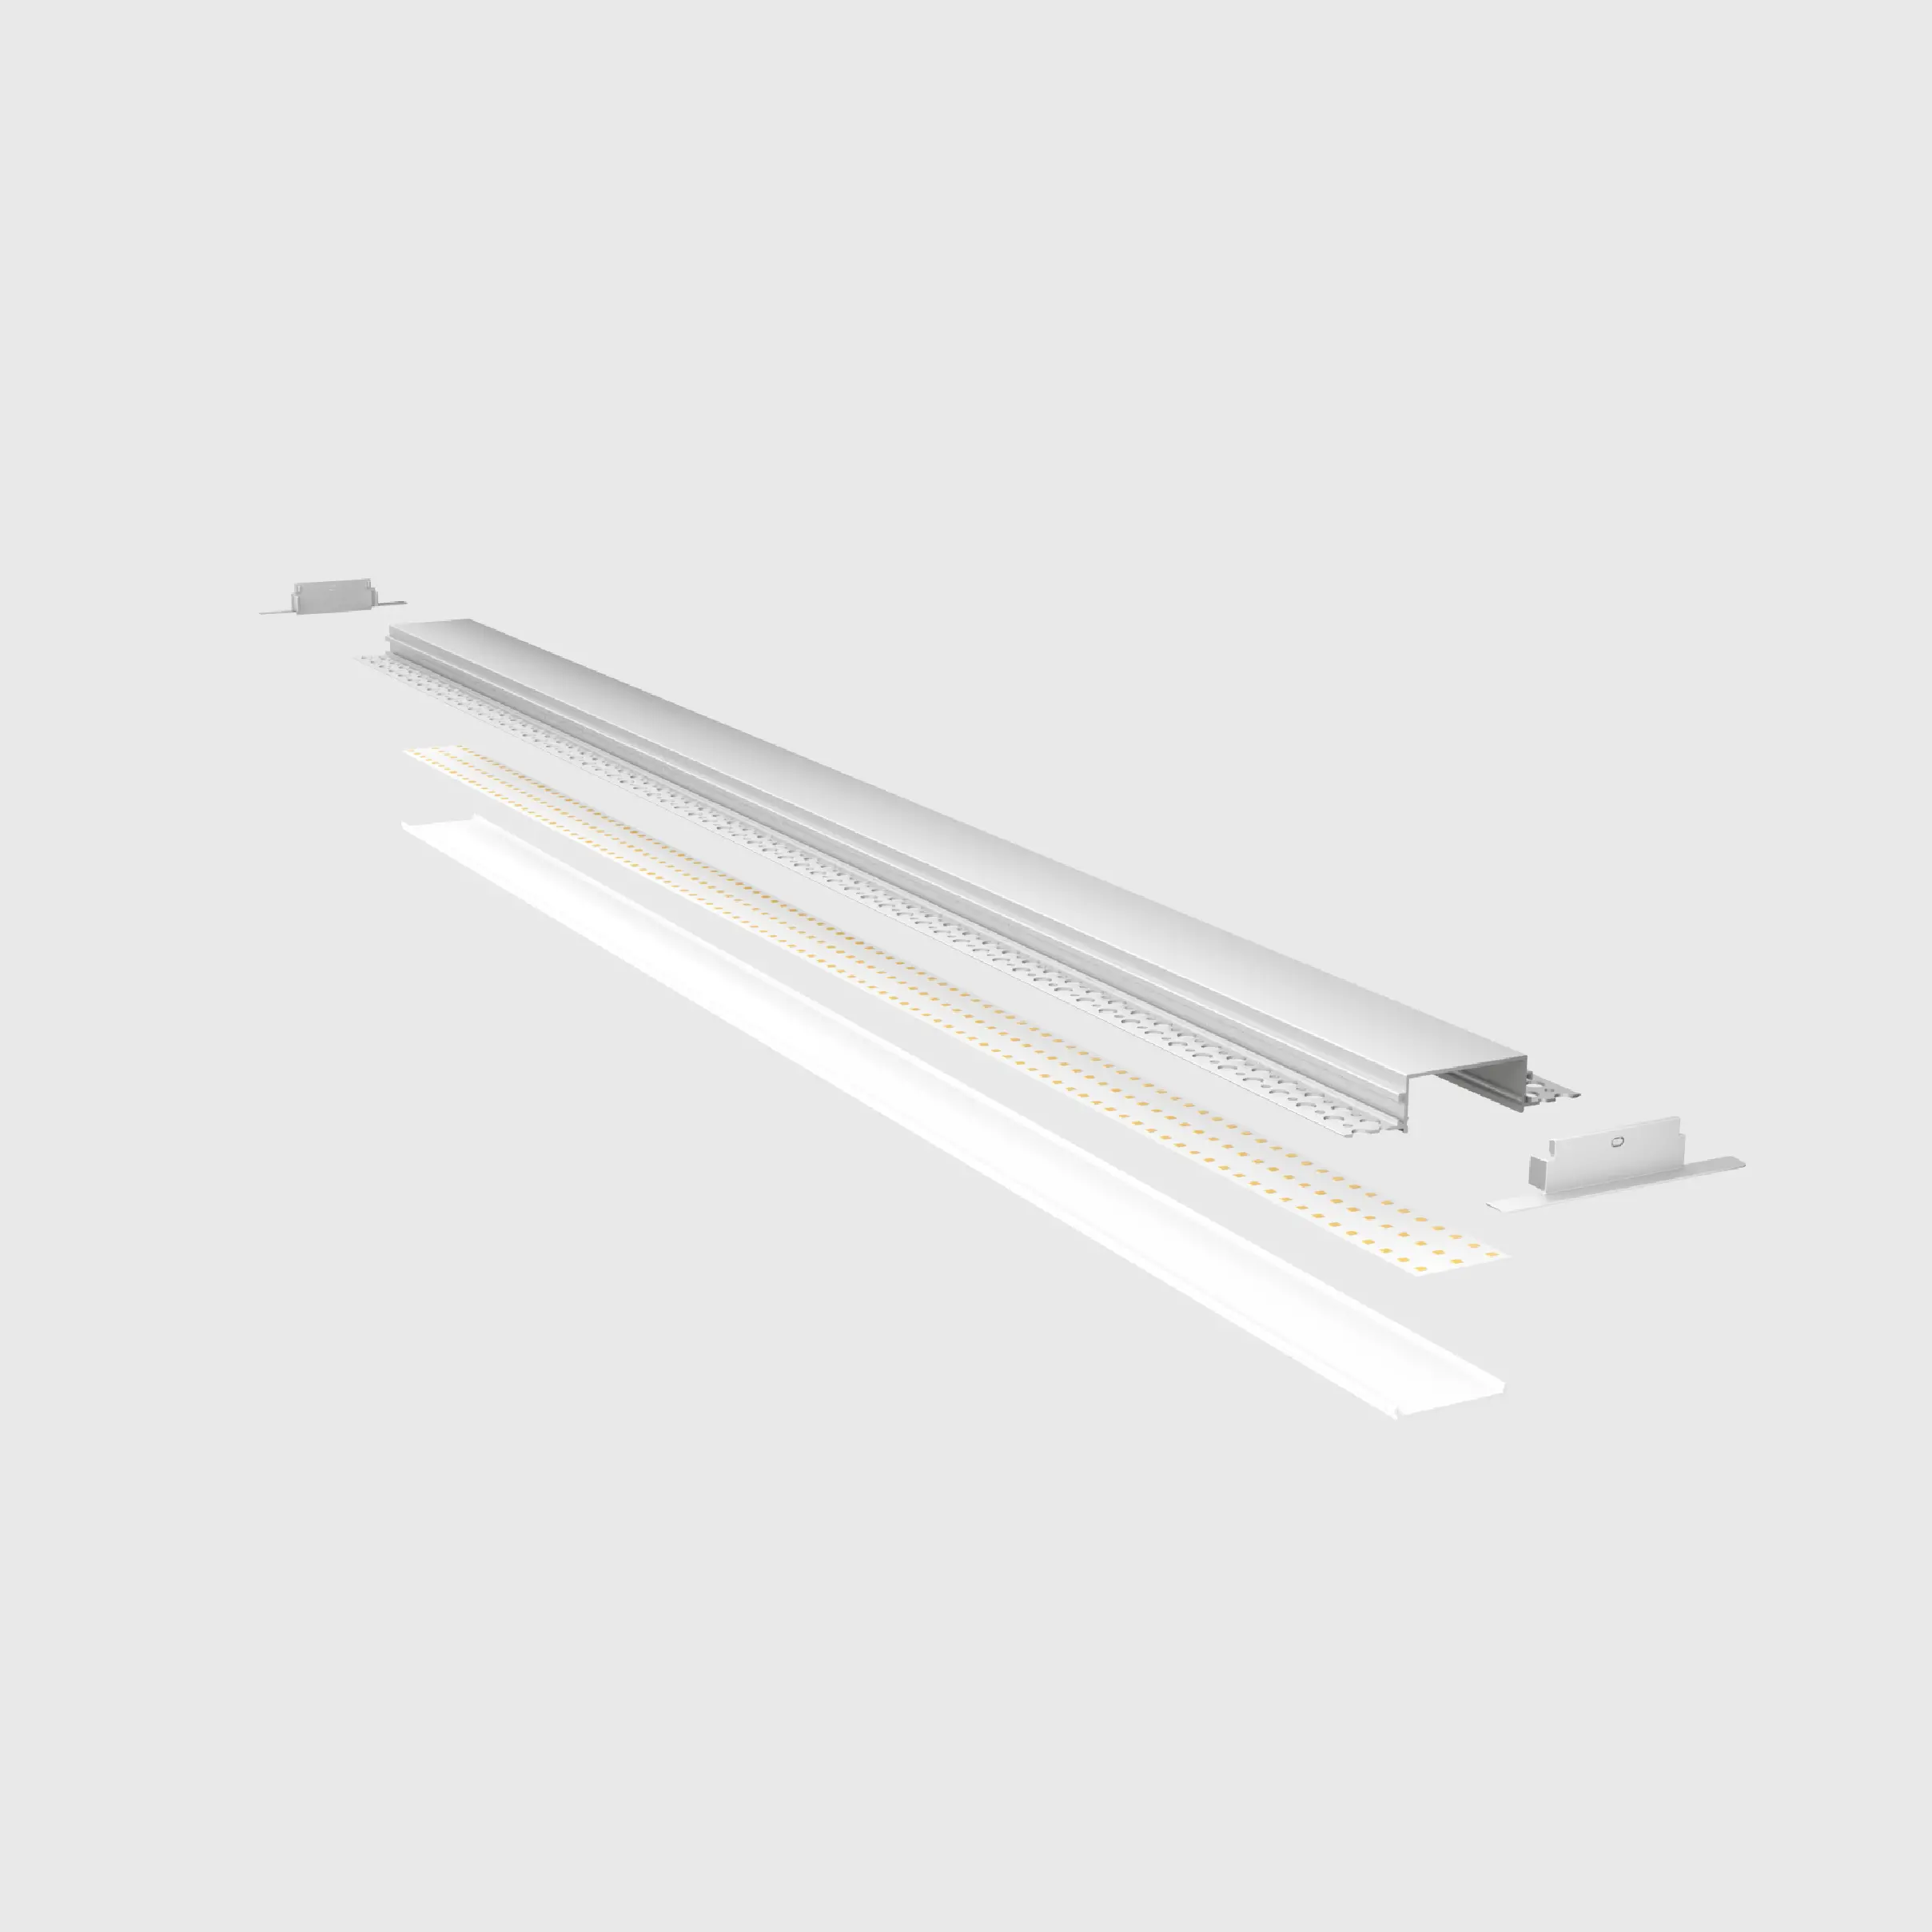 LD11820: Recessed Linear LED Profile